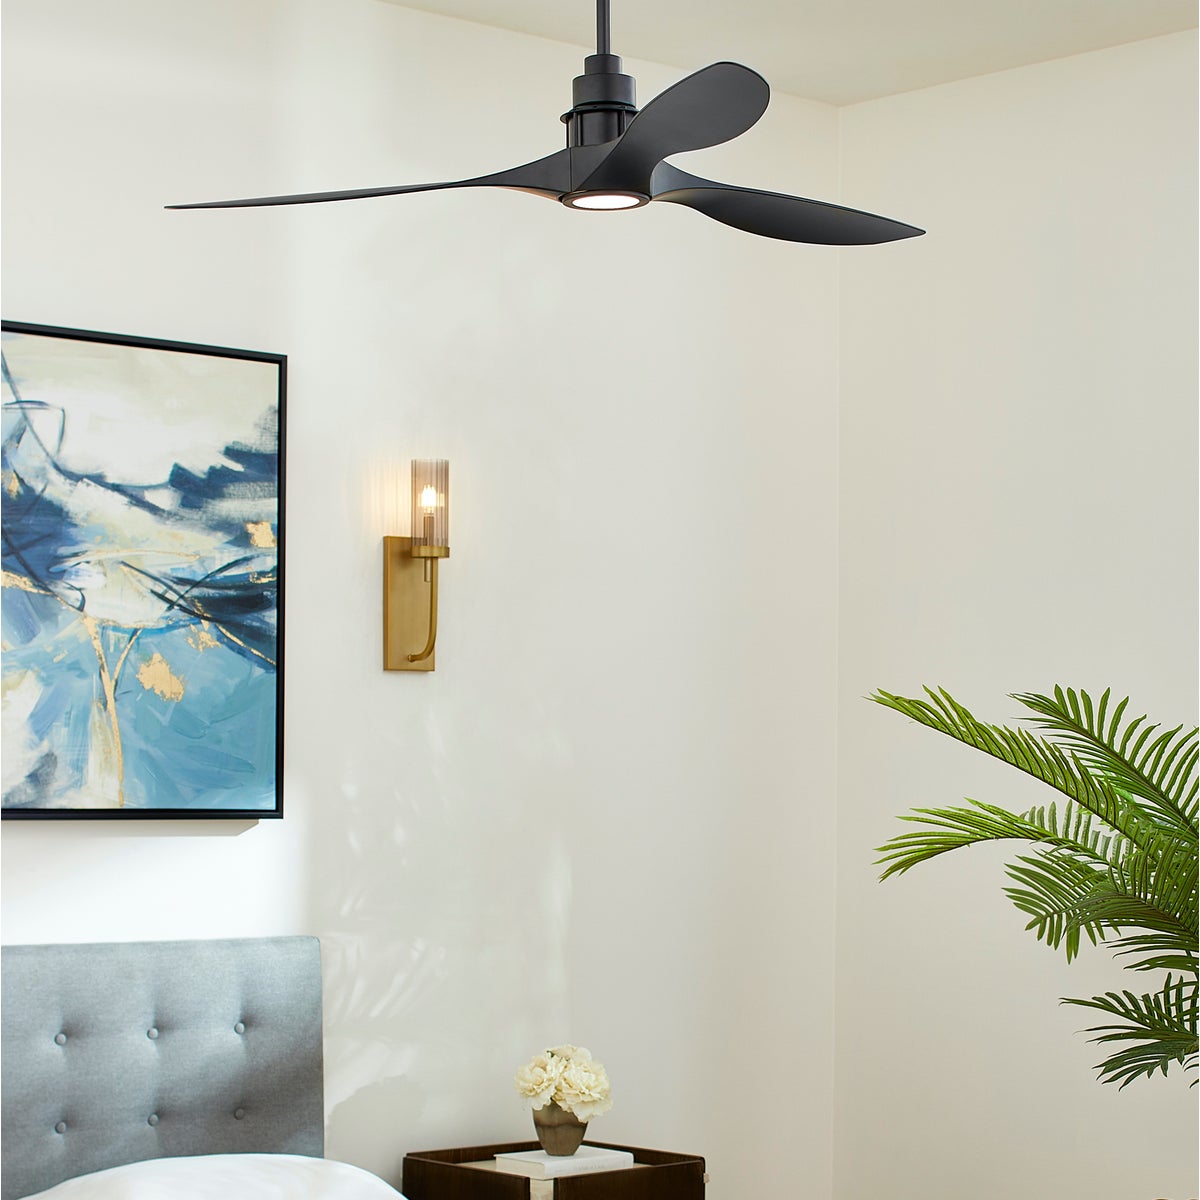 A sleek, modern ceiling fan with light in matte black finish. Features a trio of monochromatic blades for powerful air circulation. Perfect for any interior space.